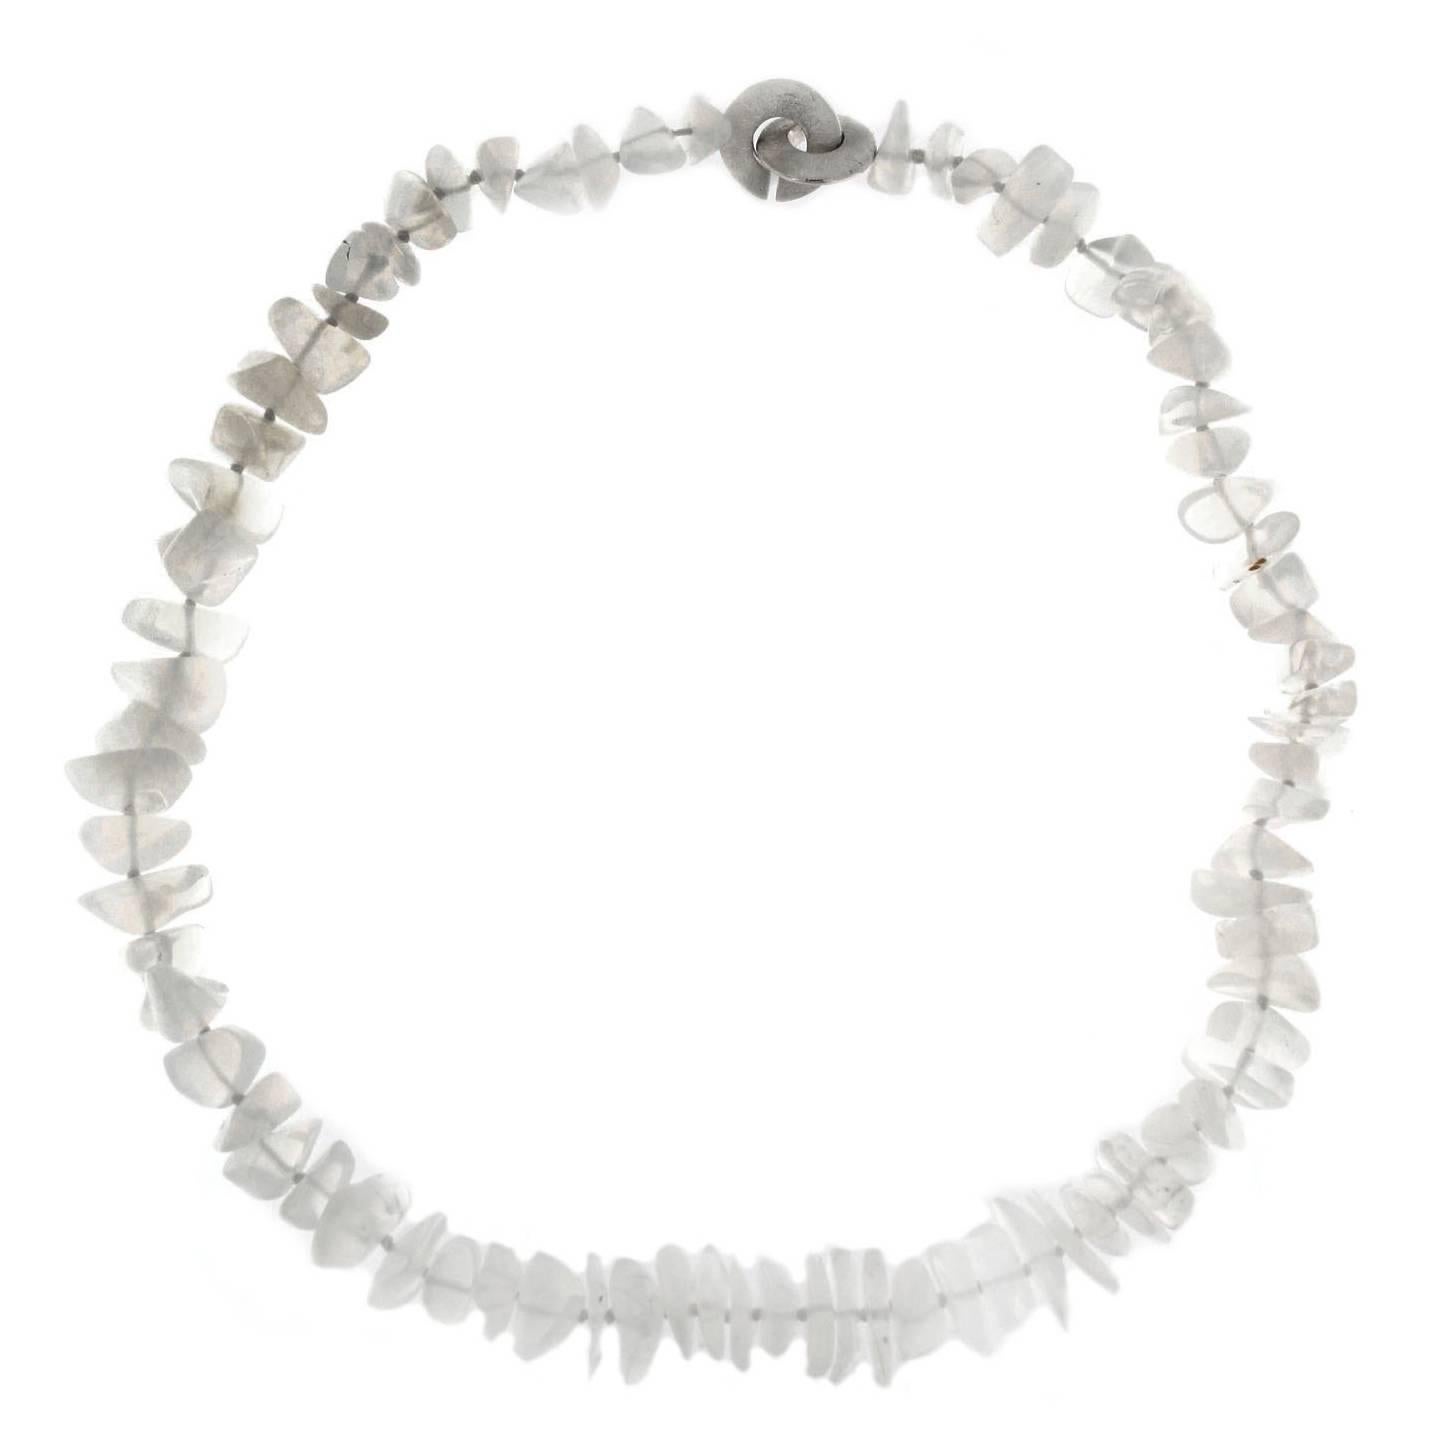 Alex Jona design collection Opal necklace with a brushed sterling silver clasp. Each bead is polished in its natural shape.Total length 19.29